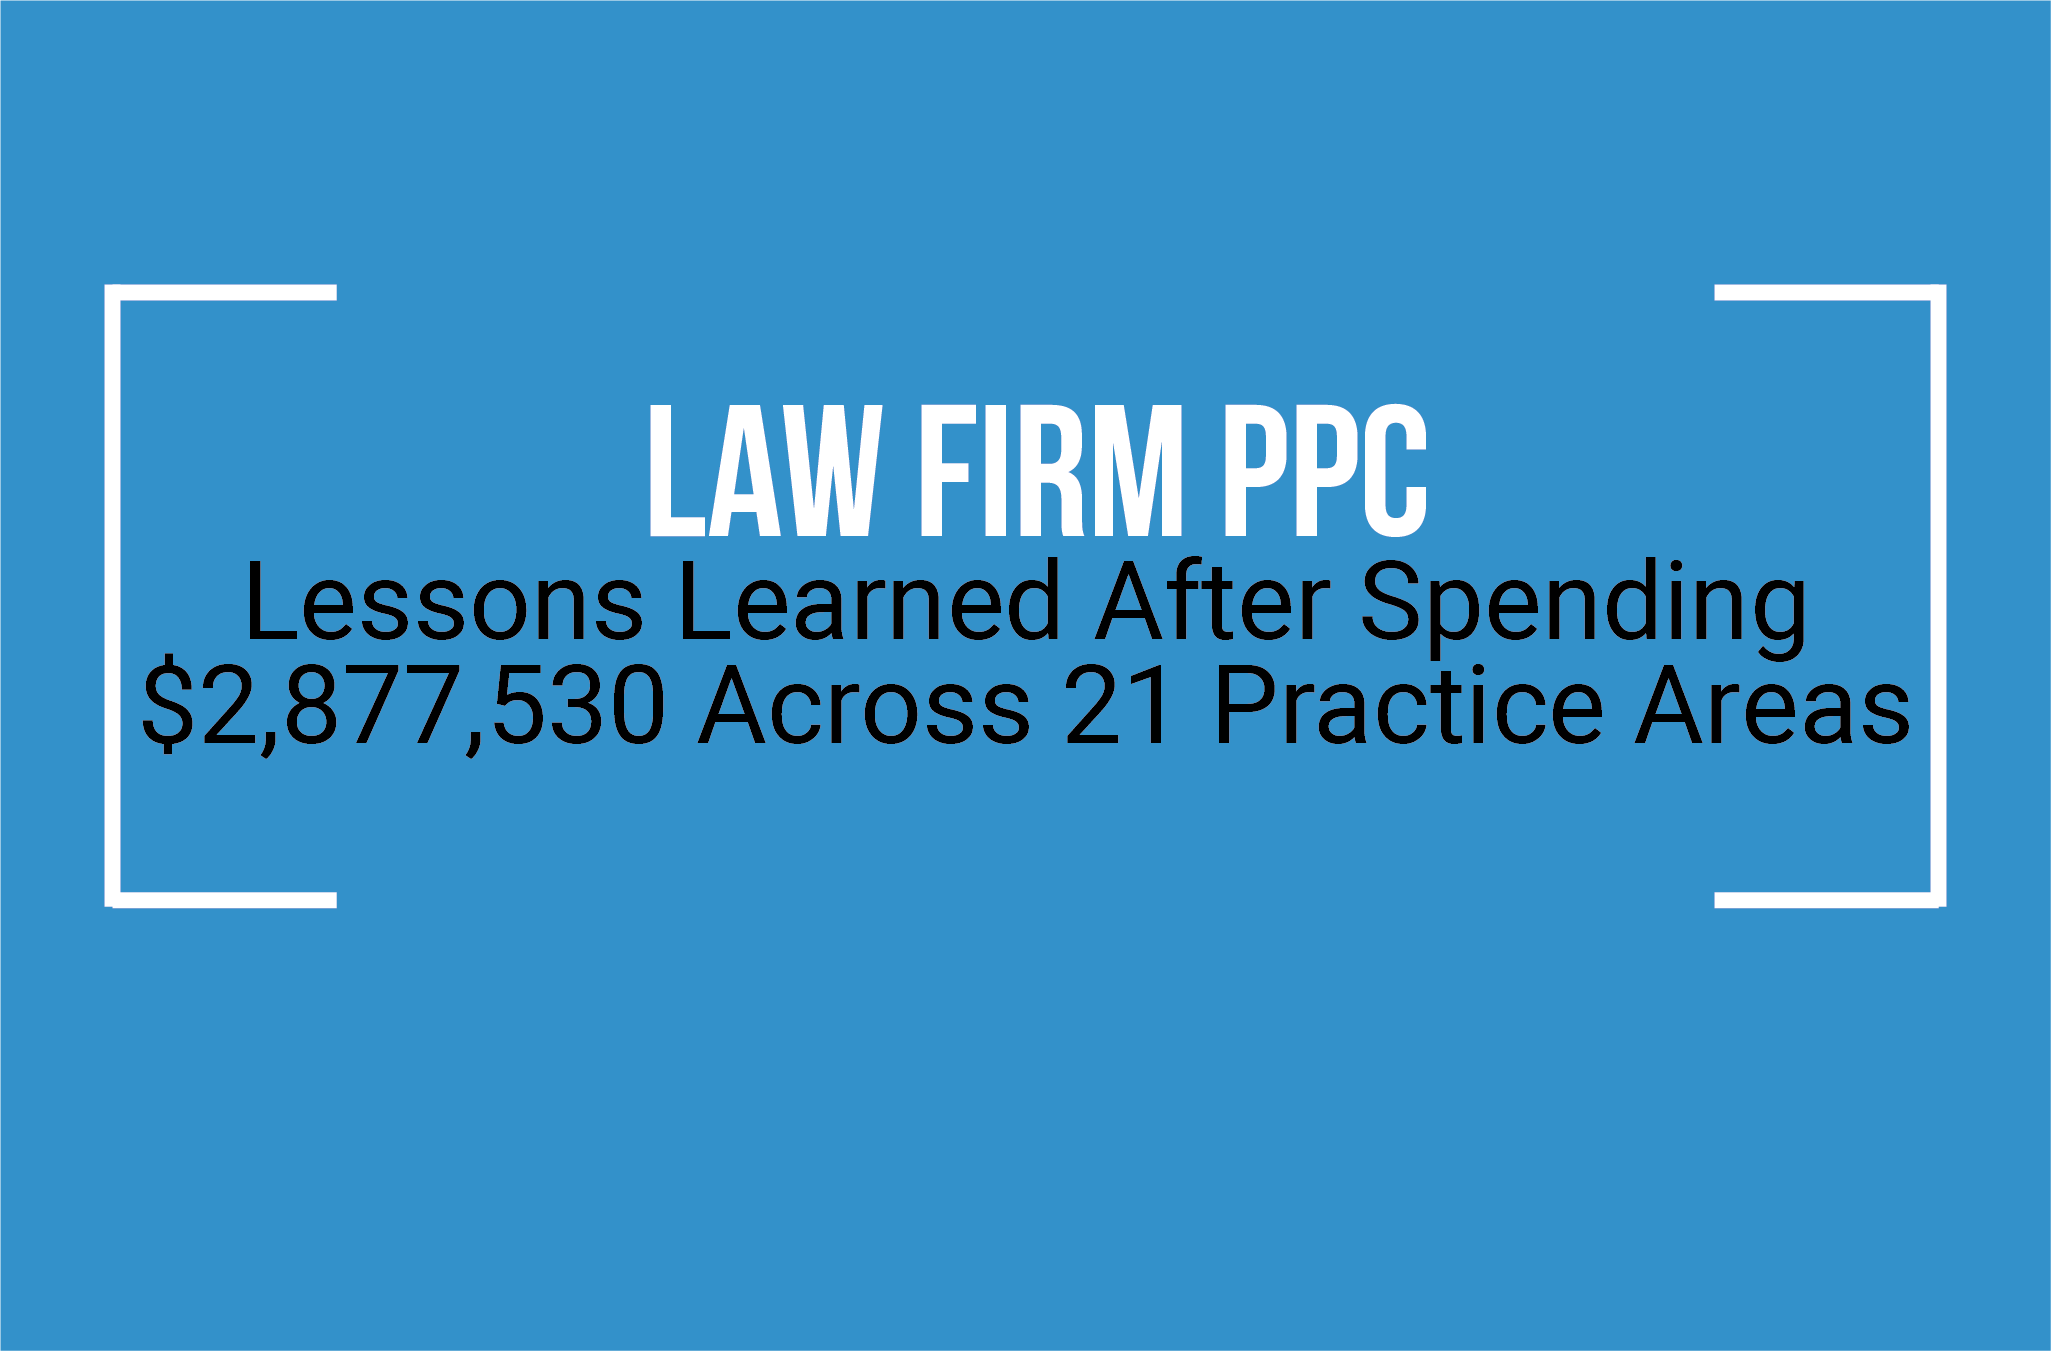 Law Firm PPC: Lessons Learned After Spending $2,877,530 Across 21 Practice Areas